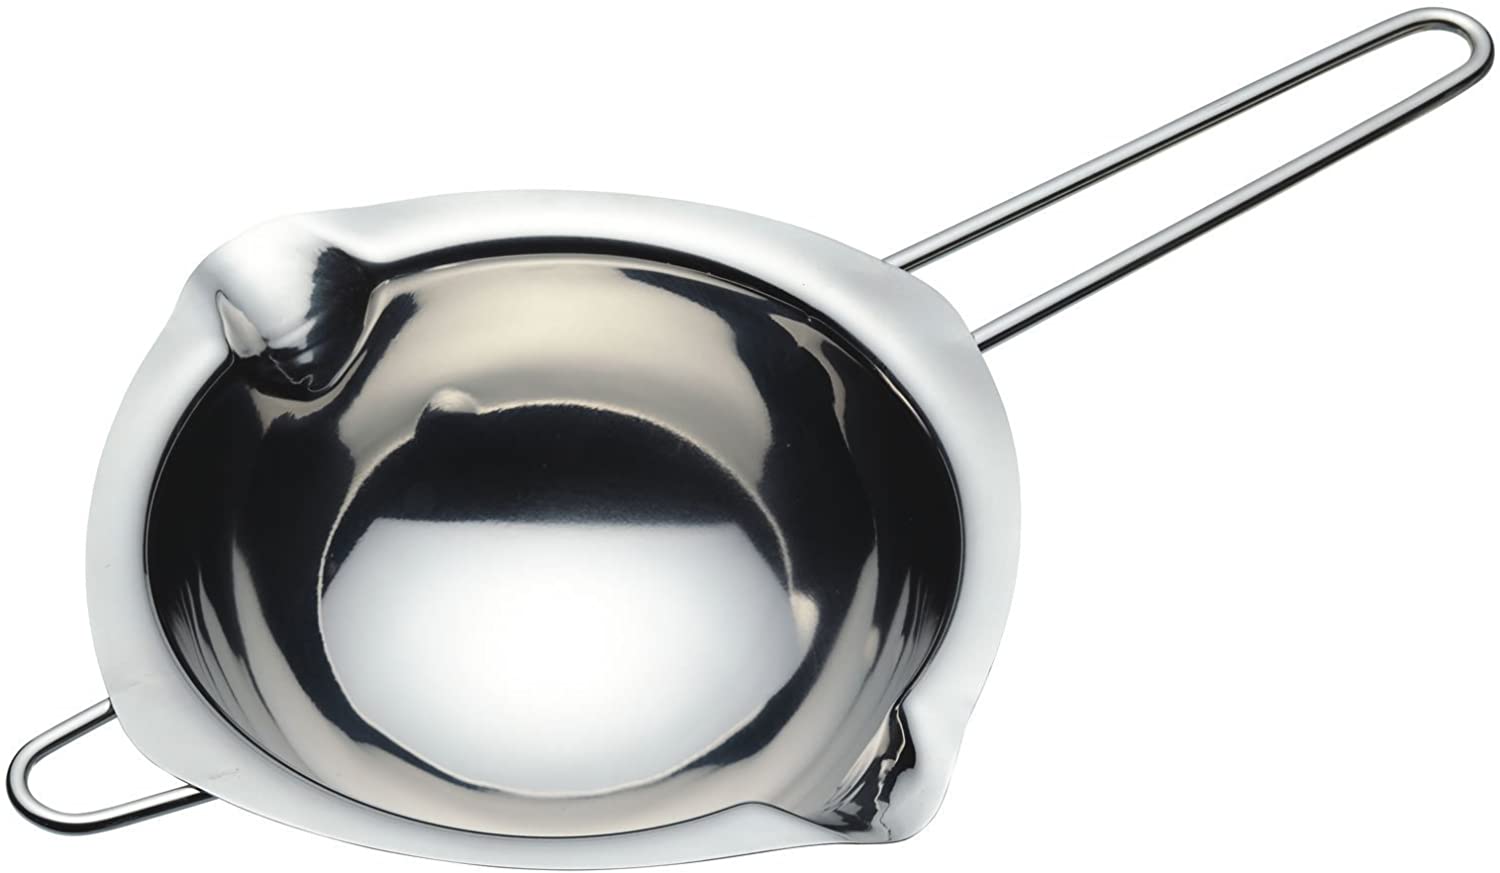 KitchenCraft Kitchen Craft Sweetly Does It Stainless Steel Melting Pot, Chocolate